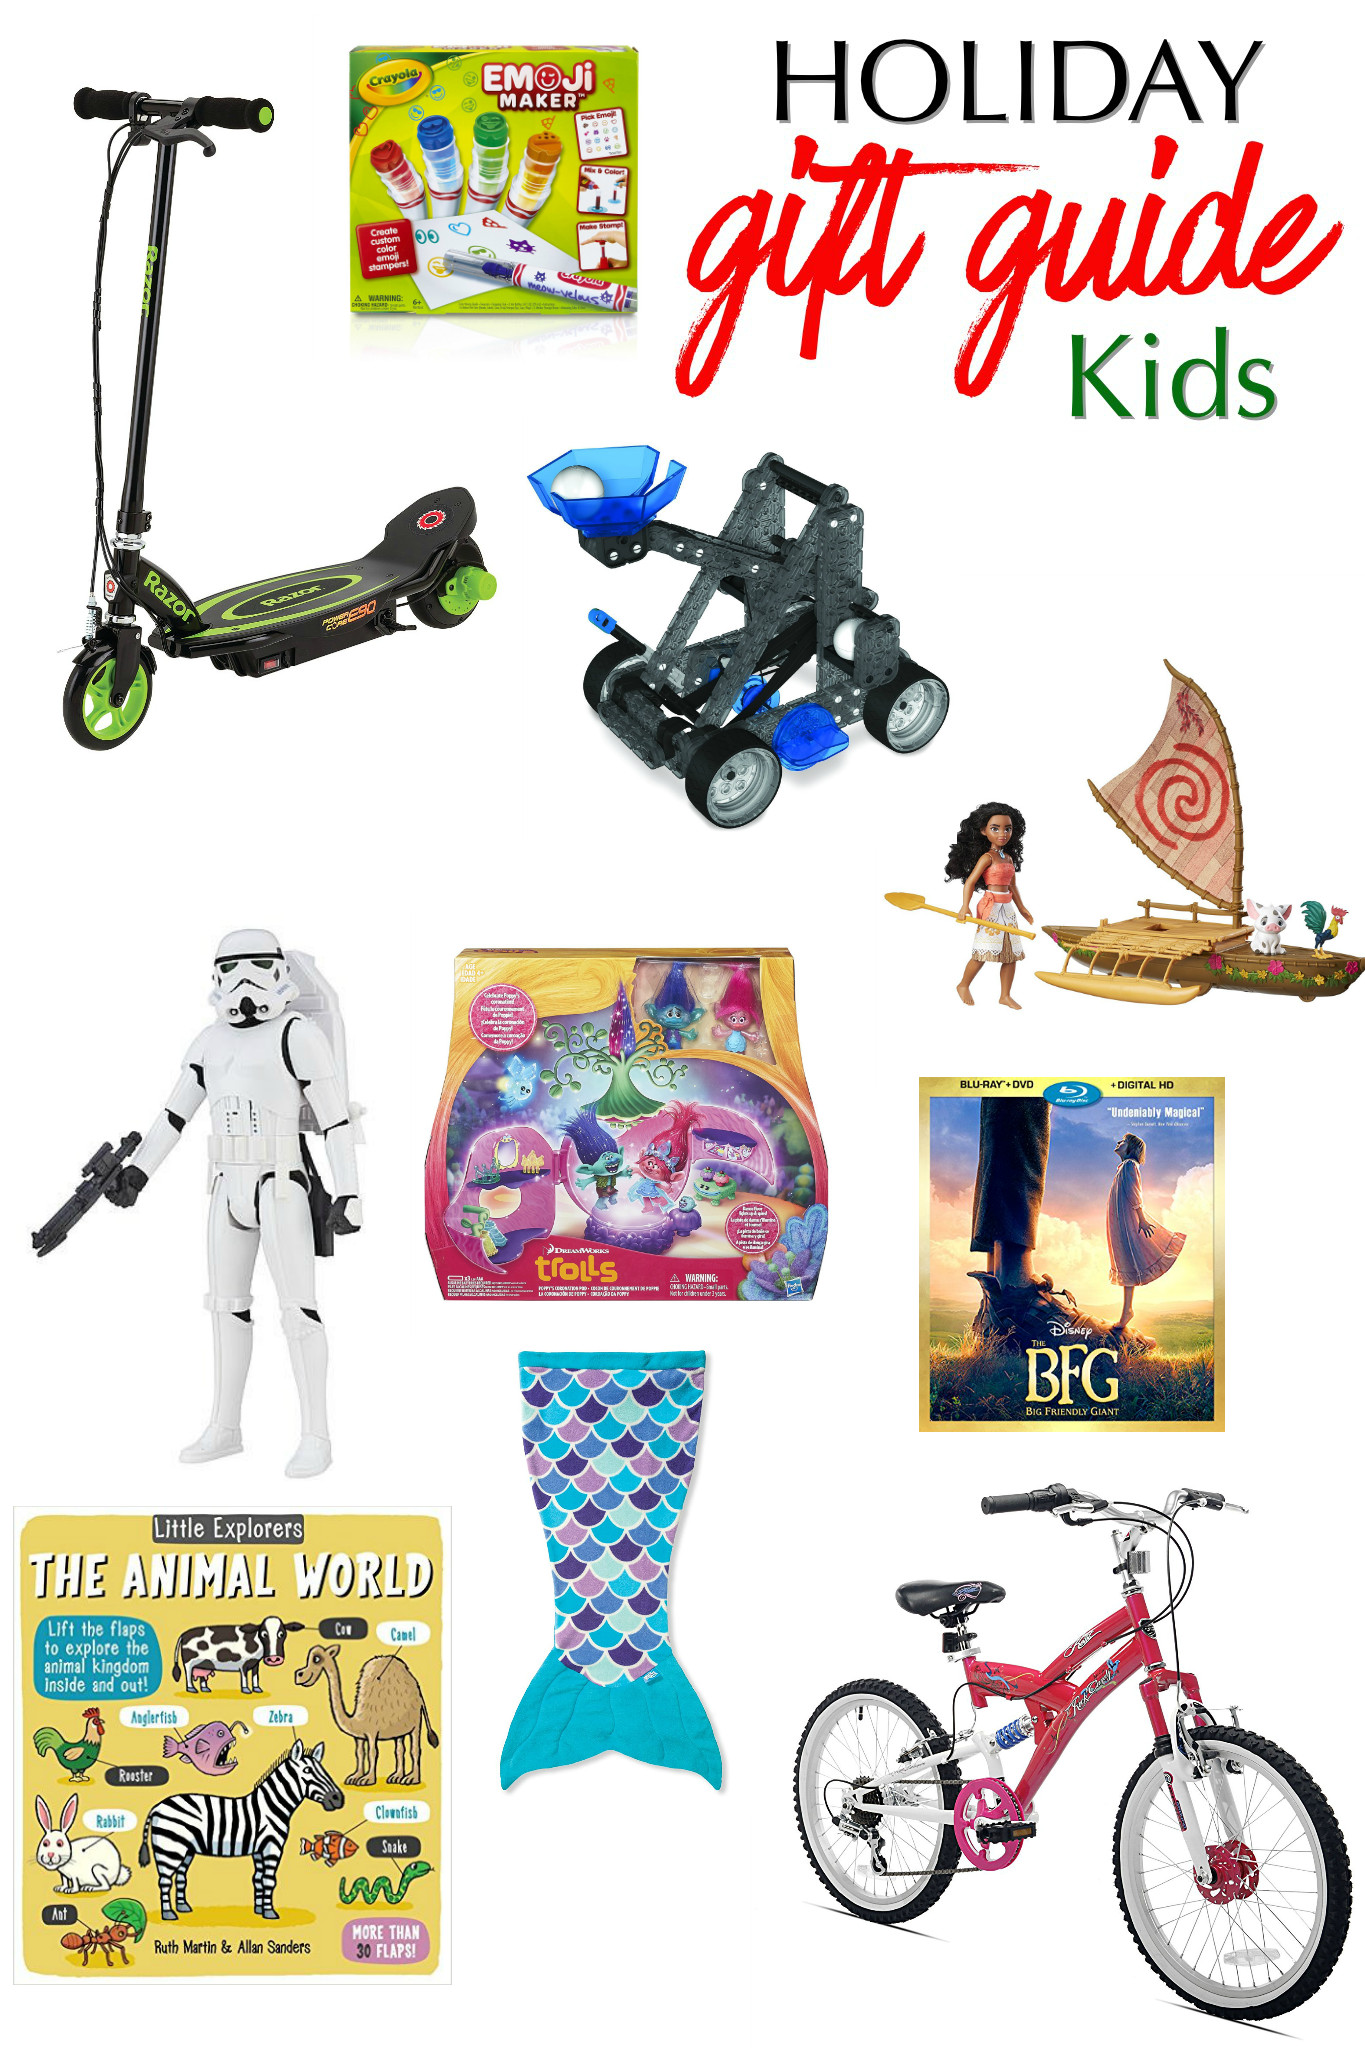 Holiday Gift Guides For Kids
 Holiday Gift Guide for Kids What Kids Really Want for